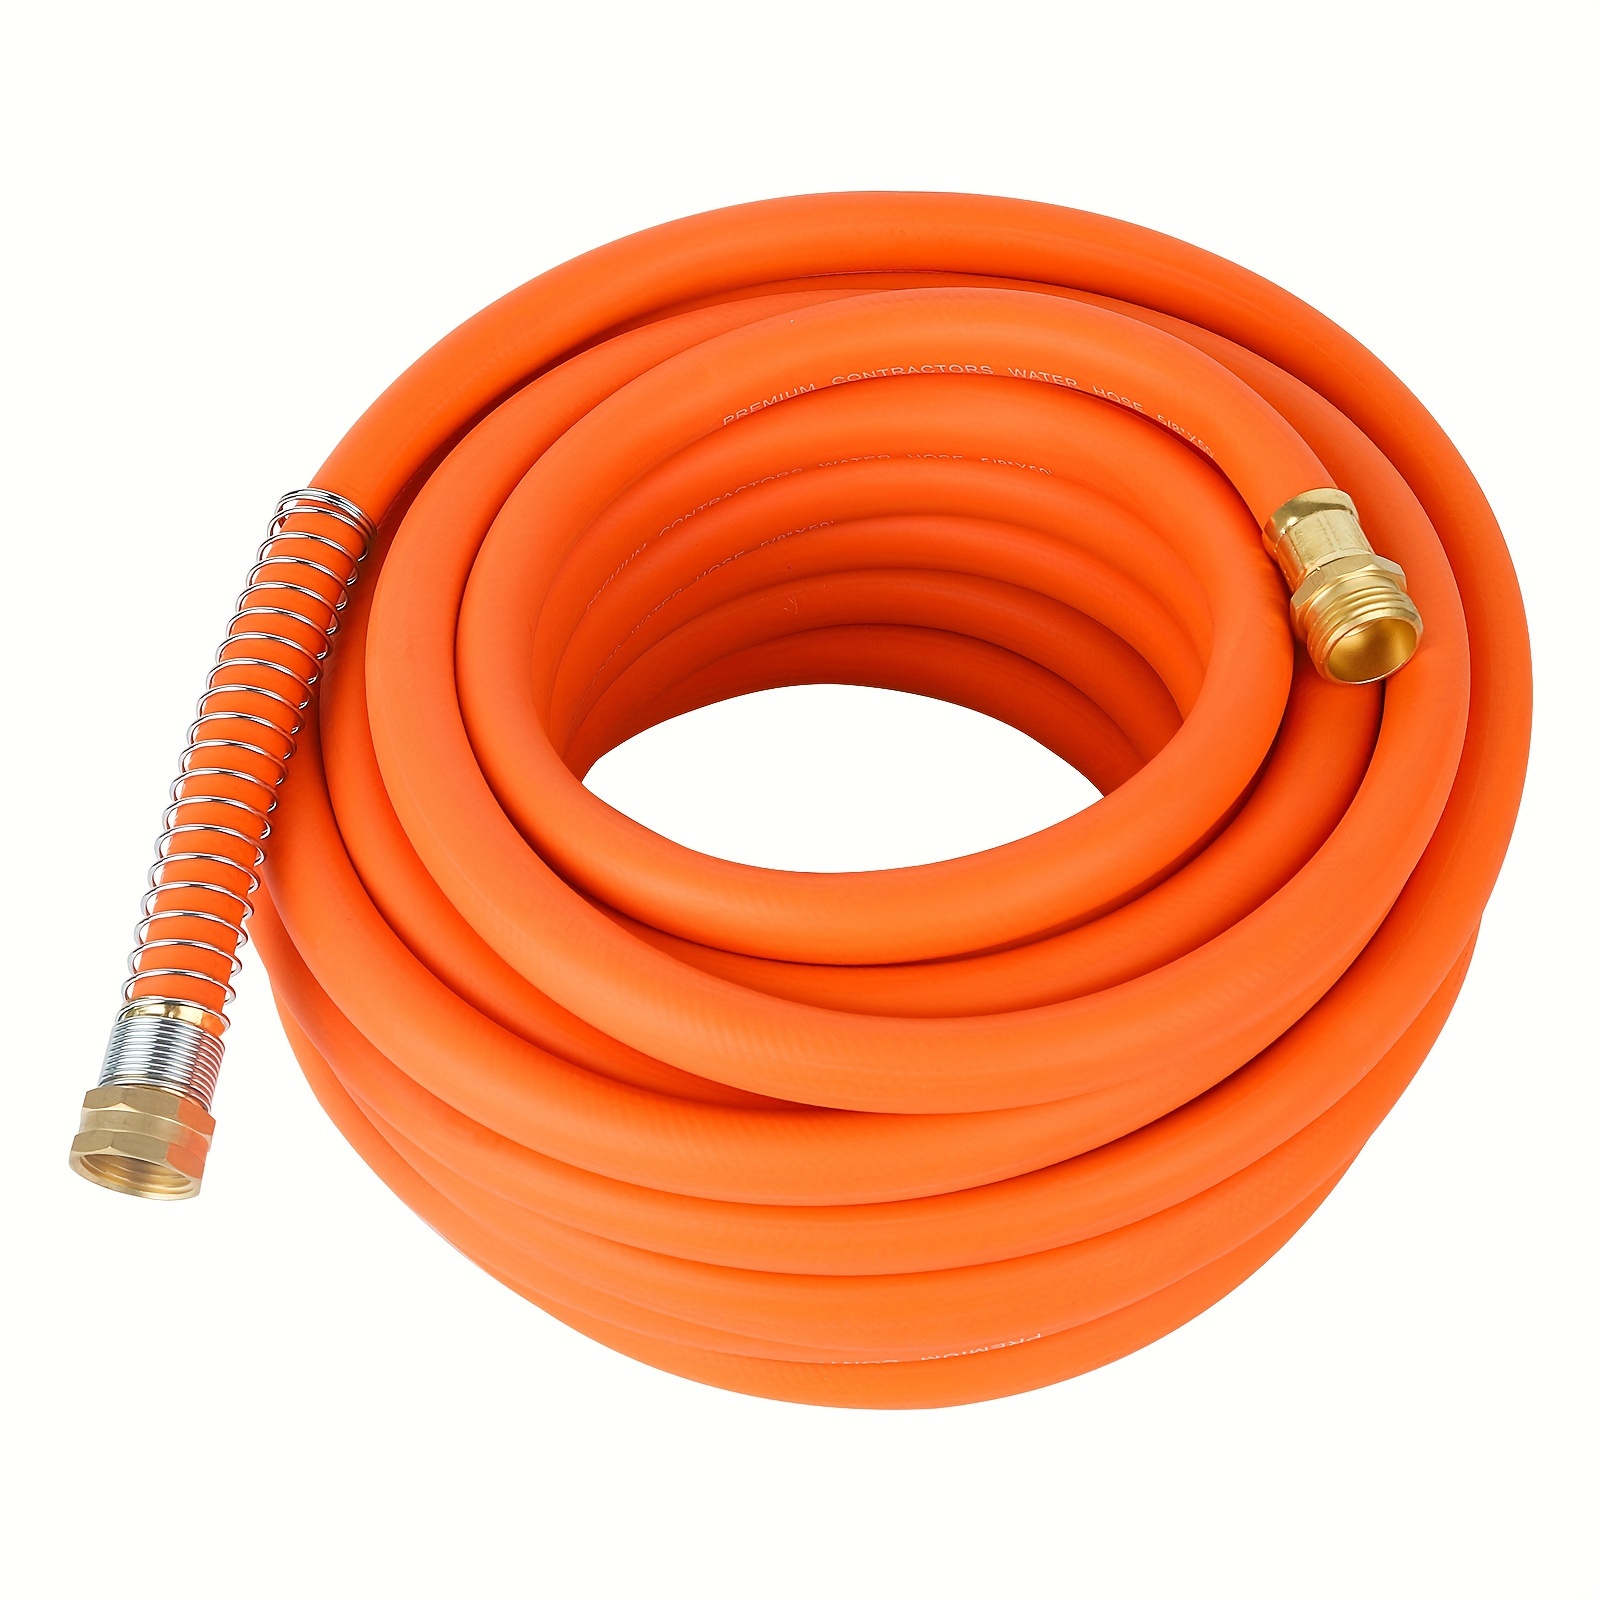 

Aain Rubber Garden Hose 5/8 In. X 50 Ft With 3/4'' Male To Female Solid Brass Fittings Flexible Lightweight Water Hose For All-weather Outdoor, Car Wash, Lawn 150 Psi, Orange